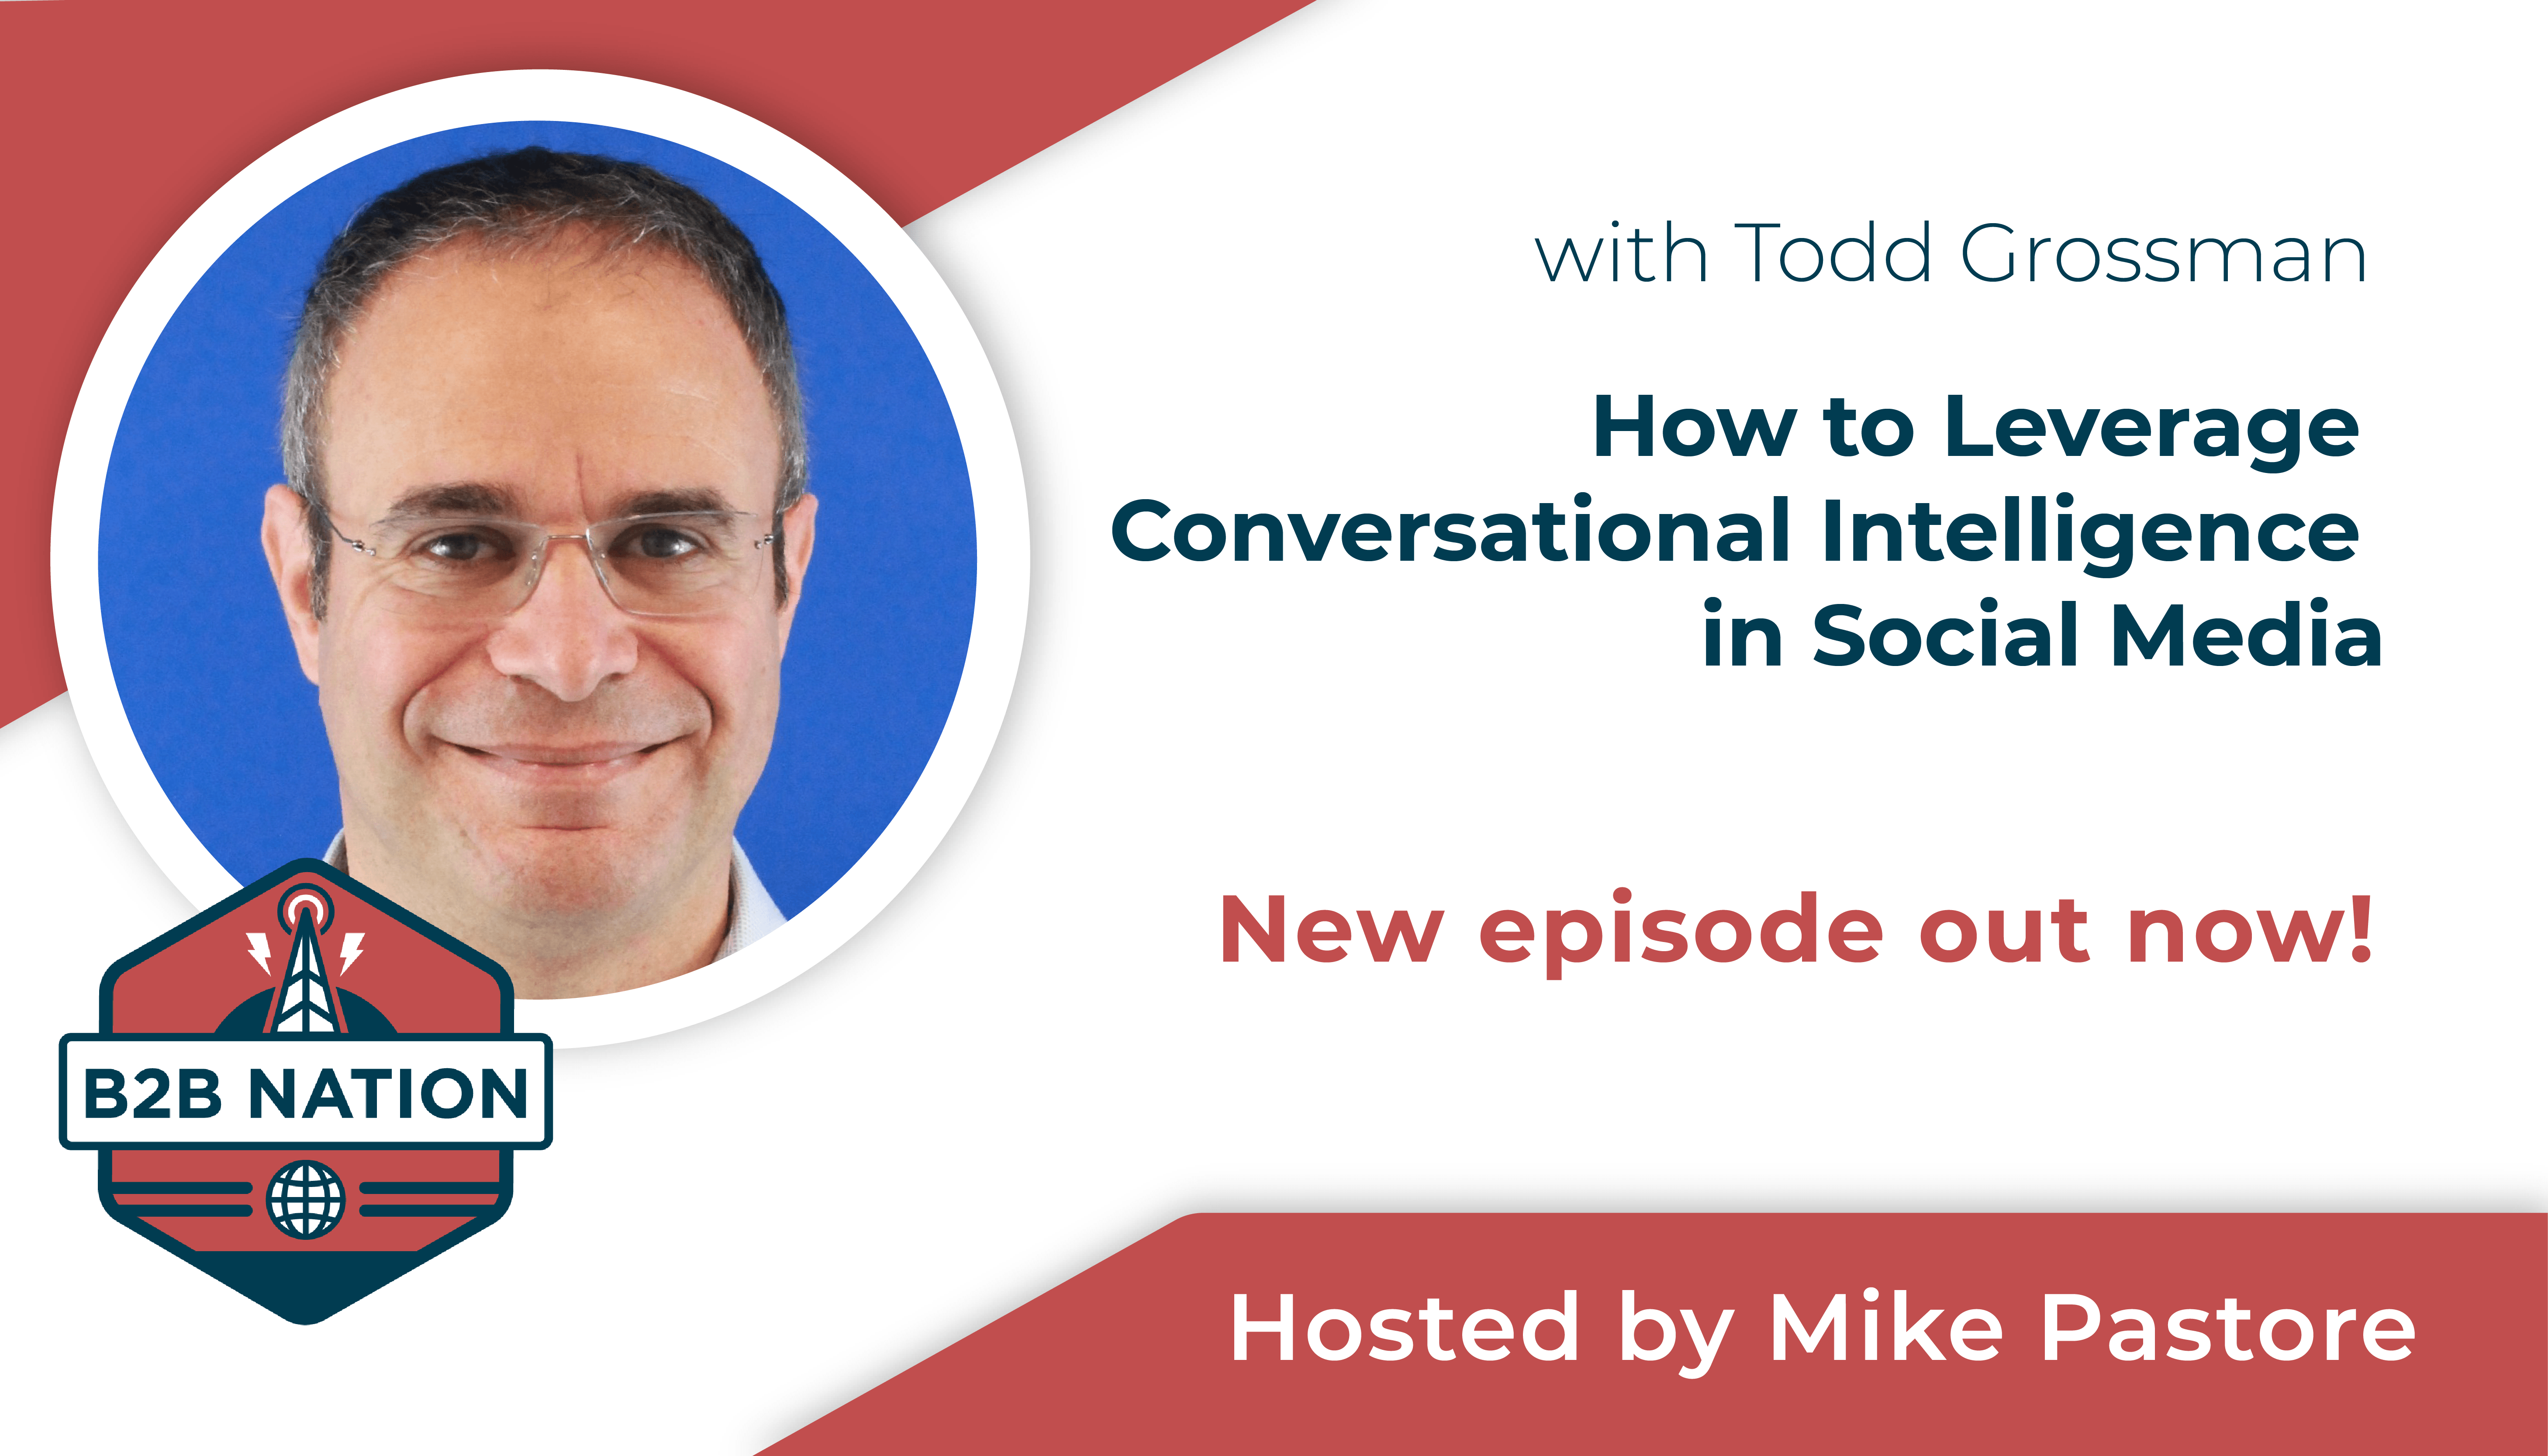 How to leverage conversational intelligence in social media.